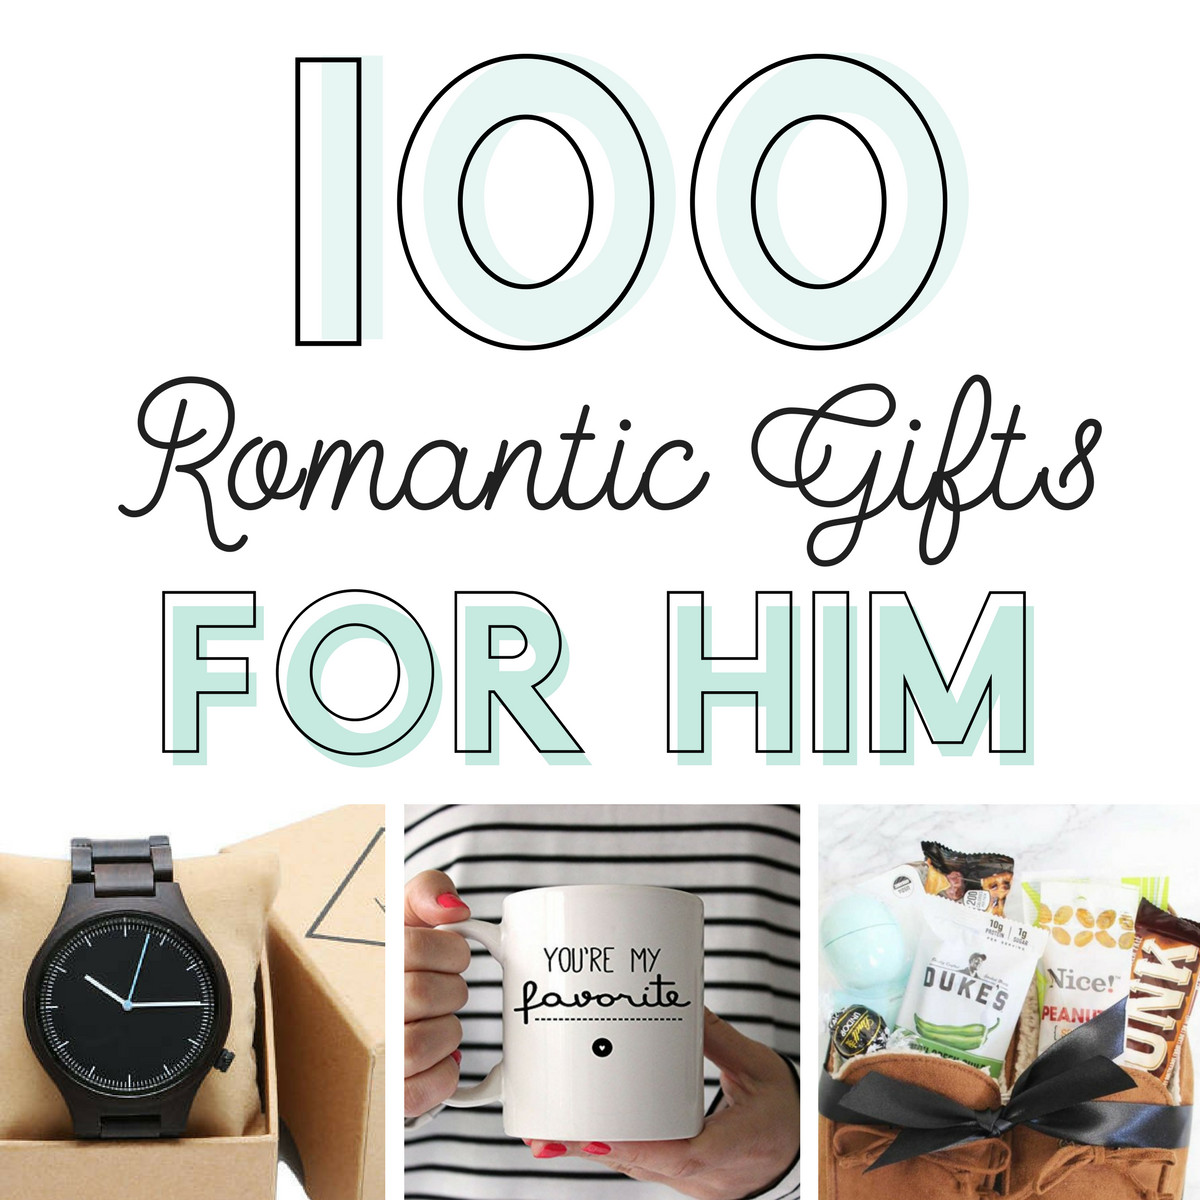 Birthday Gift Ideas For Him
 100 Romantic Gifts for Him From The Dating Divas